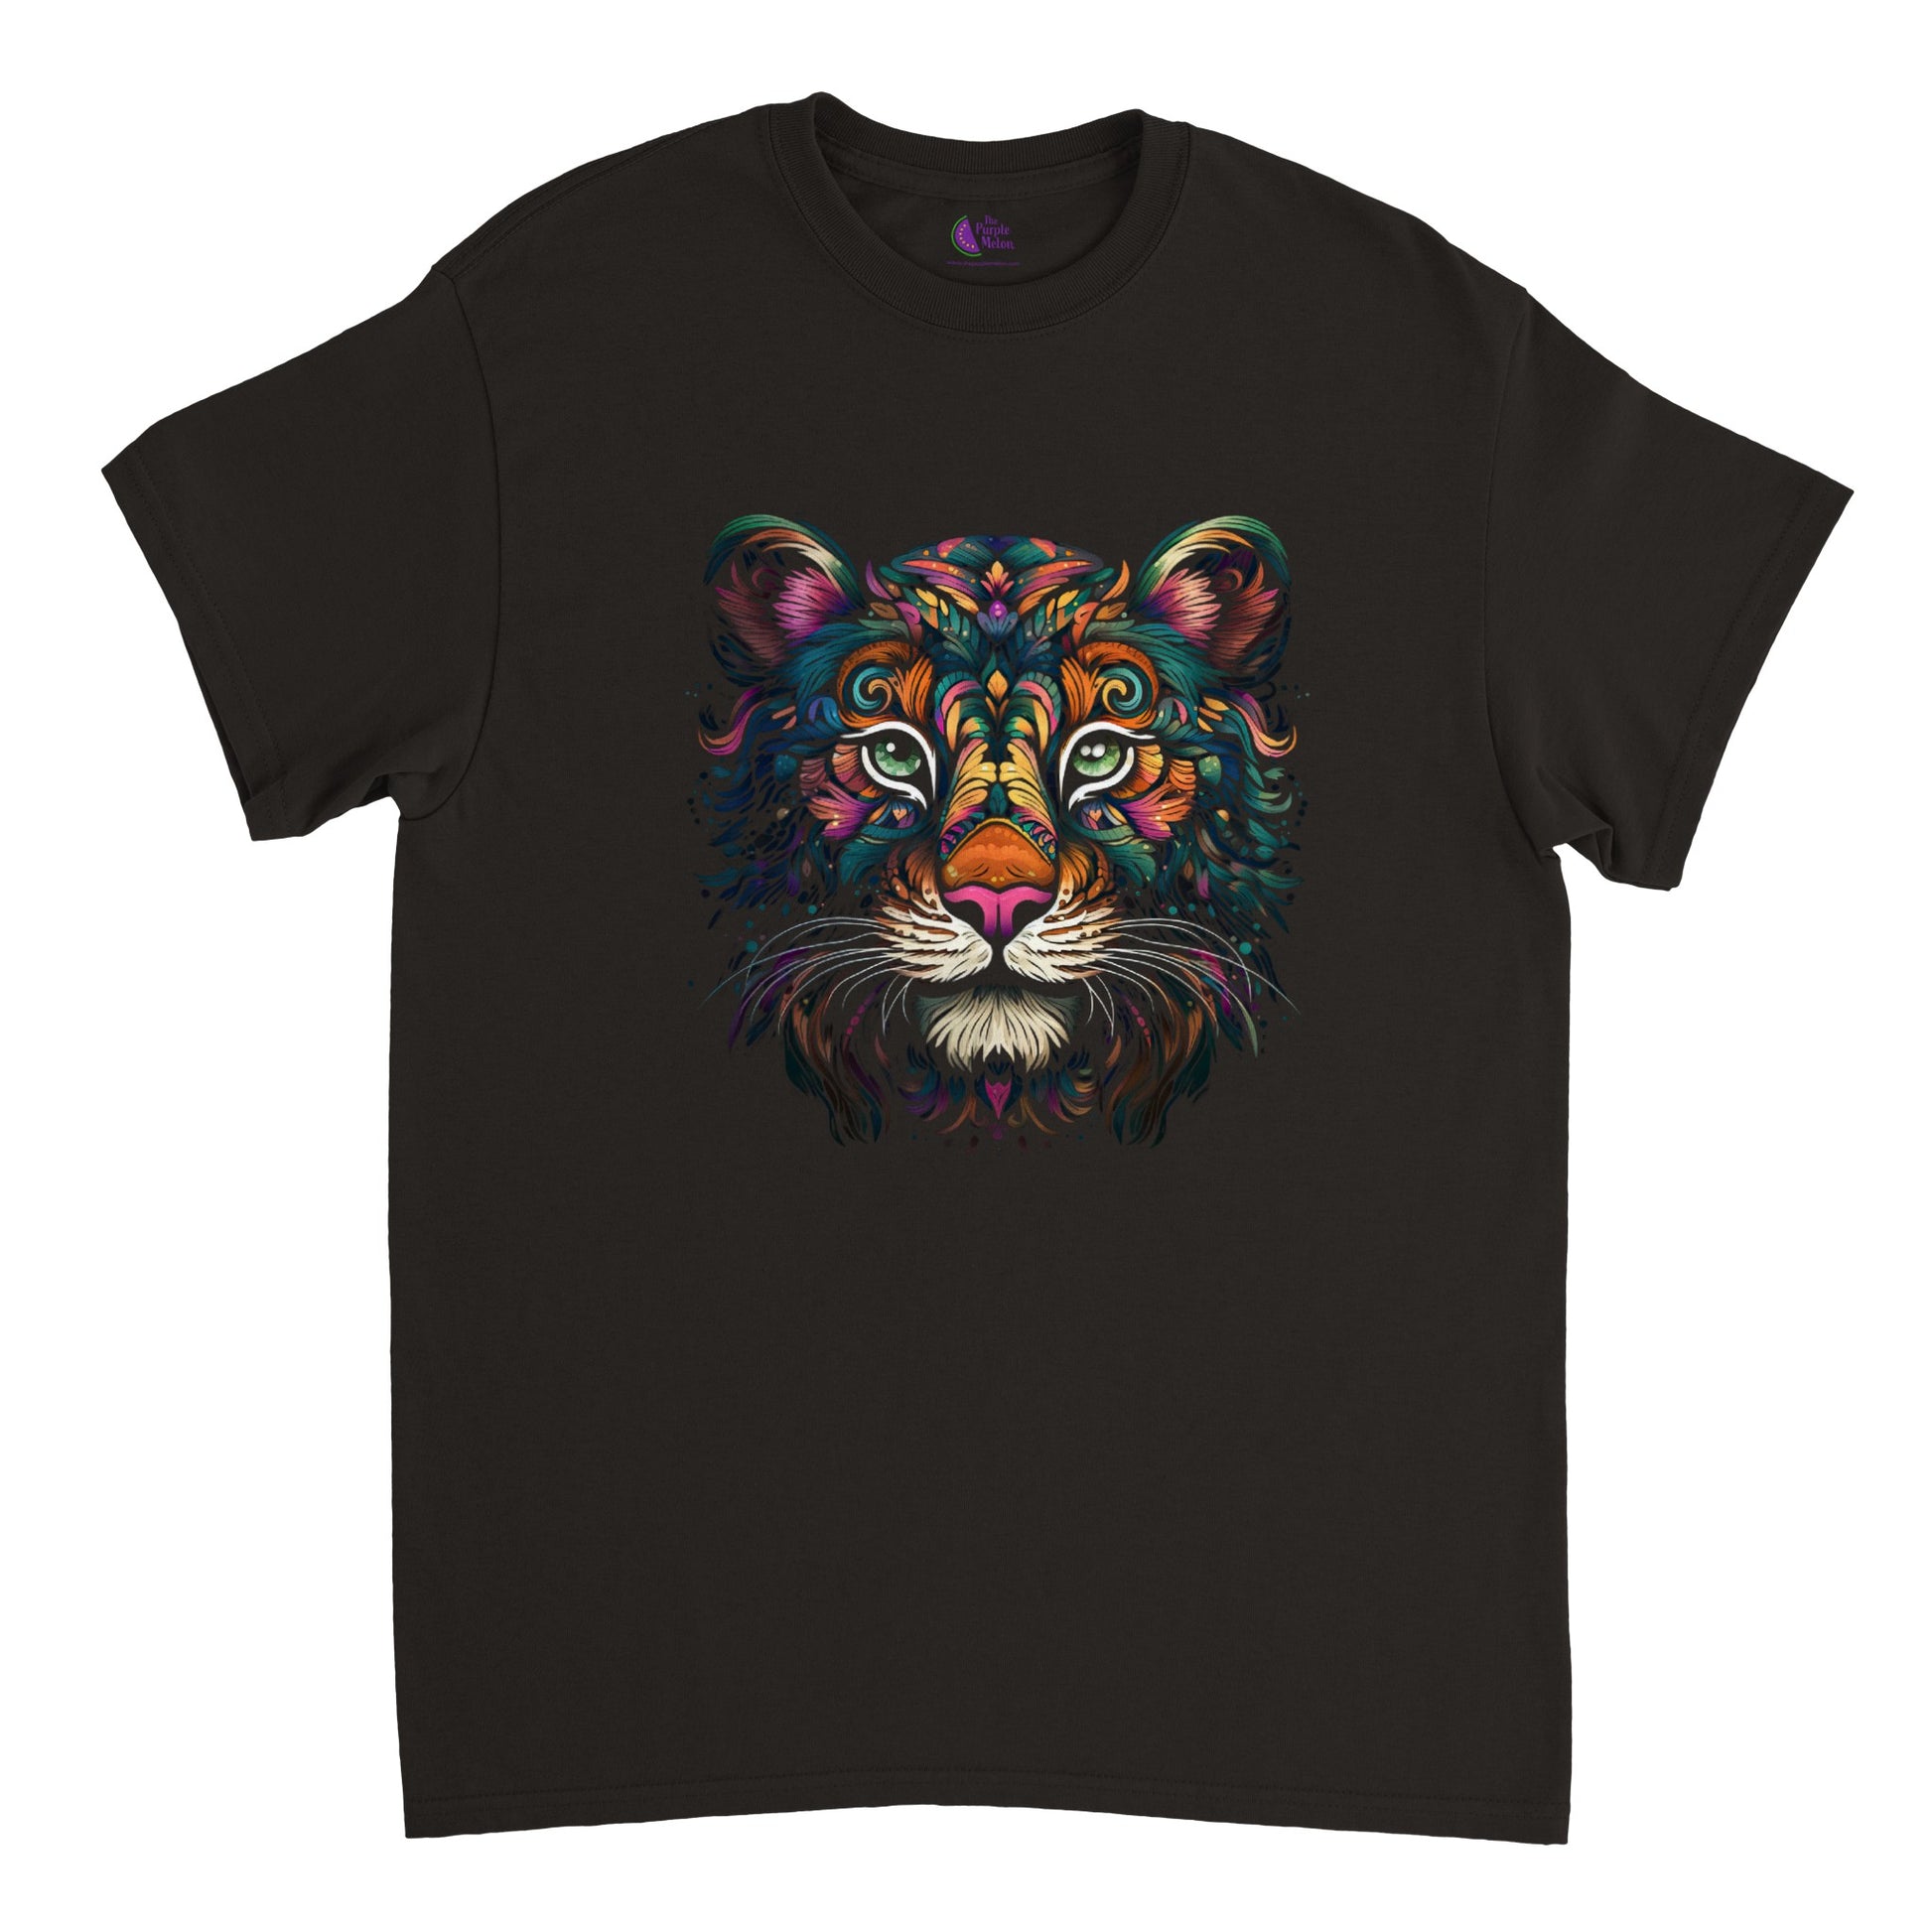 Black t-shirt with a colorful floral tiger print